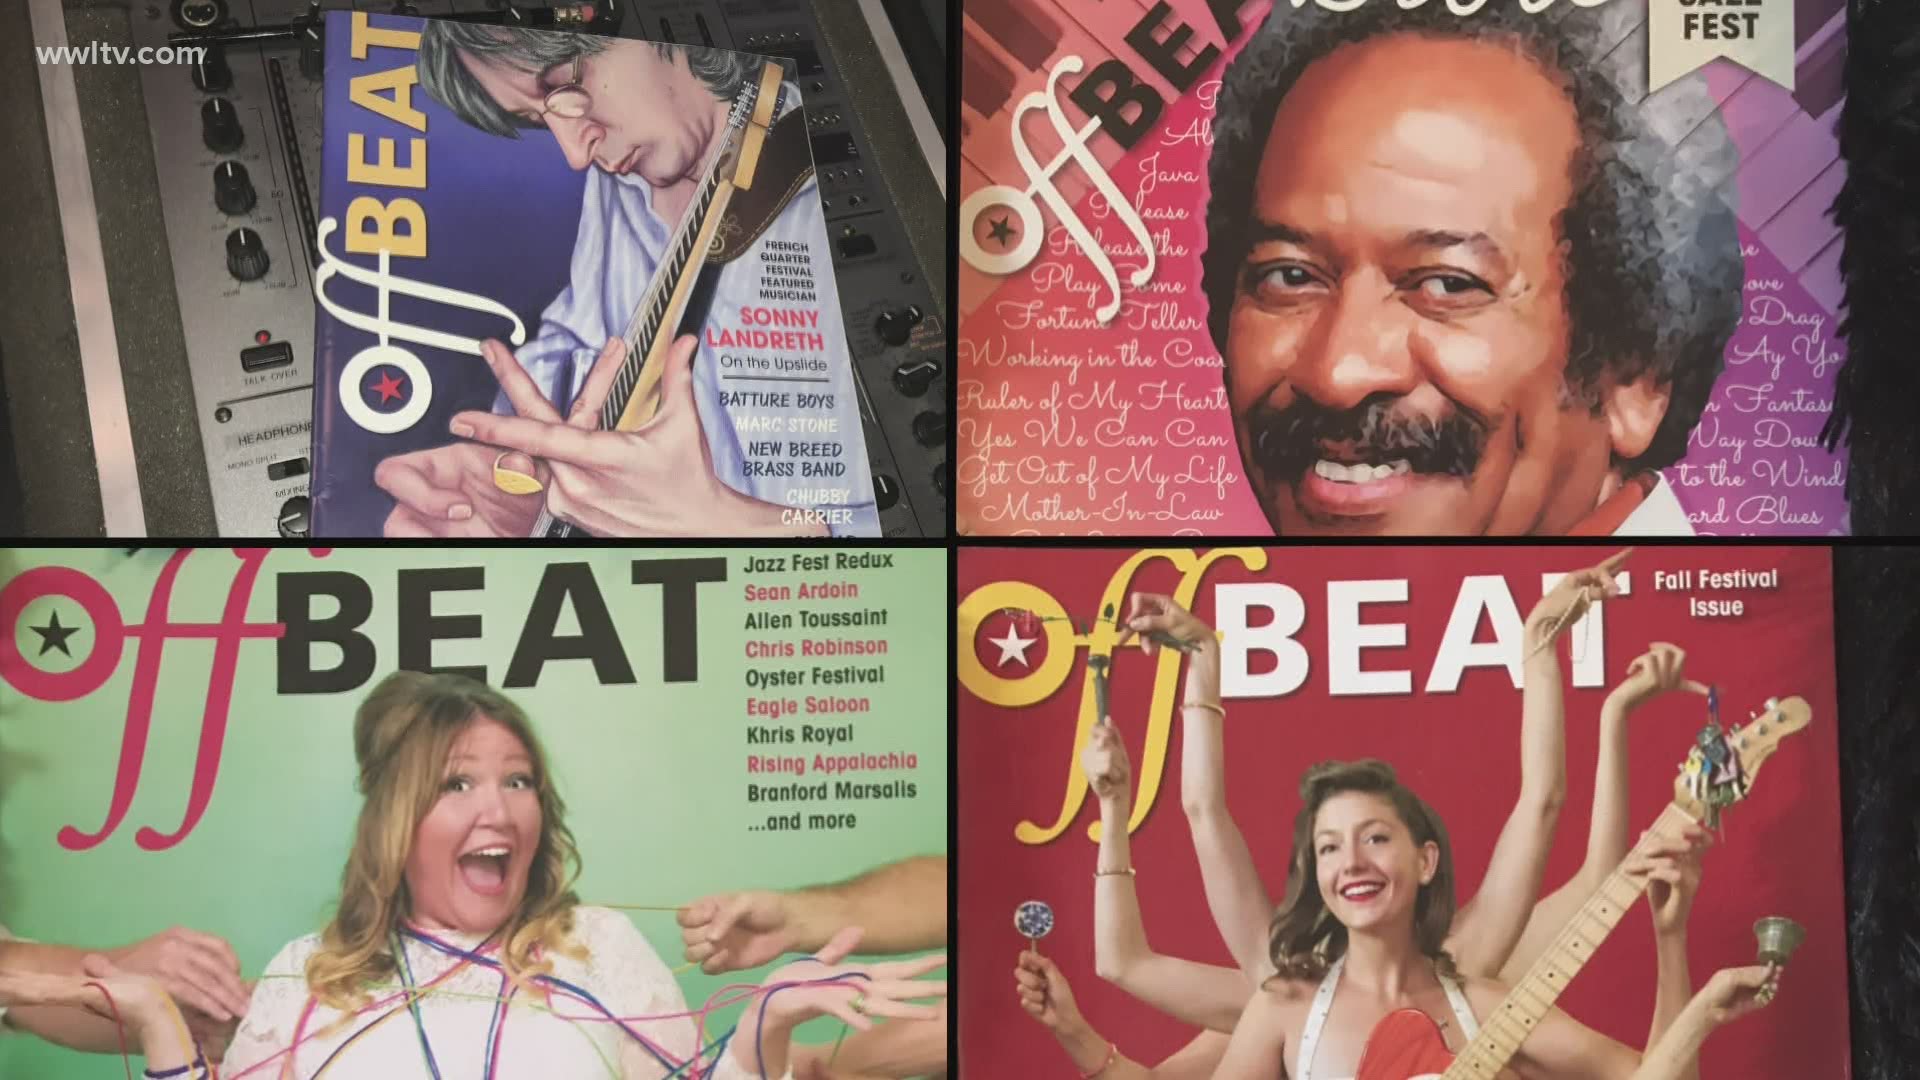 Offbeat Magazine has taken a big hit since the virus came to the city but is being hopeful for a return in the future.